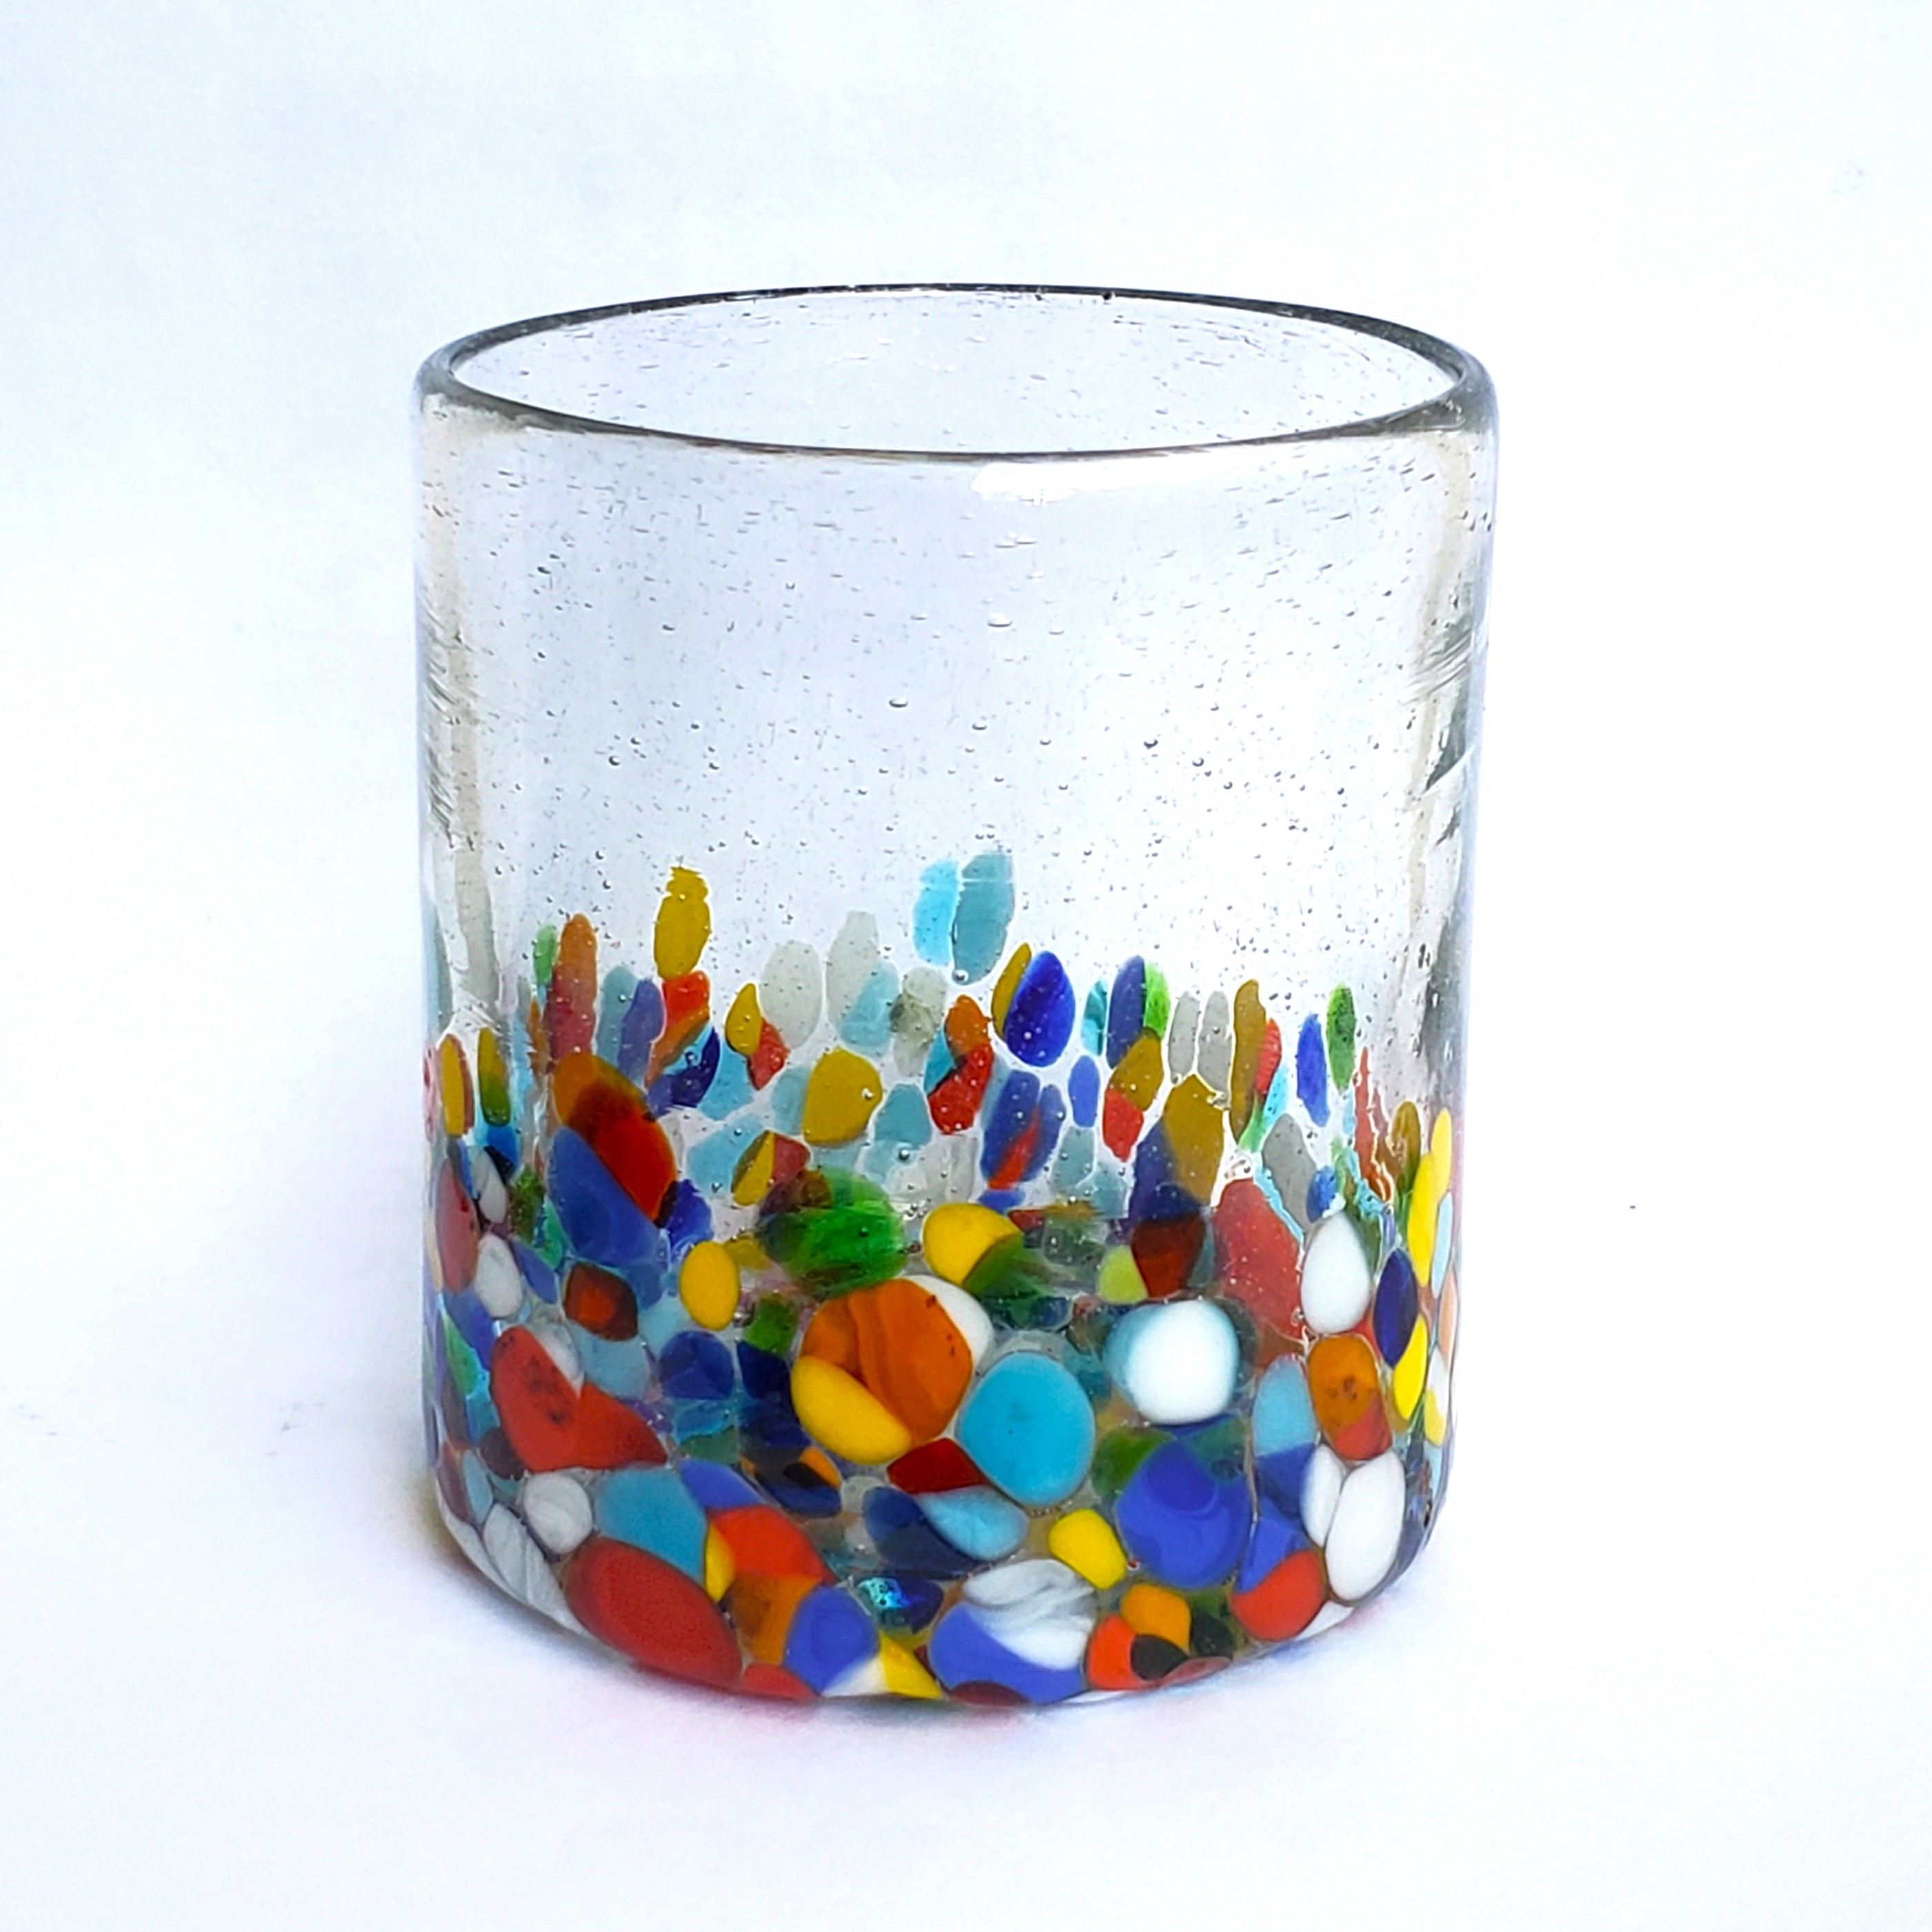 New Items / Clear & Confetti 9 oz Short Tumblers (set of 6) / Our Clear & Confetti Glassware combines  the best of two worlds: clear, thick, sturdy handcrafted glass on top, meets the colorful, festive, confetti bottom! These glasses will sure be a standout in any table setting or as a fabulous gift for your loved ones. Crafted one by one by skilled artisans in Tonala, Mexico, each glass is different from the next making them unique works of art. You'll be amazed at how they make having a simple glass of water a happier experience. Made from eco-friendly recycled glass.